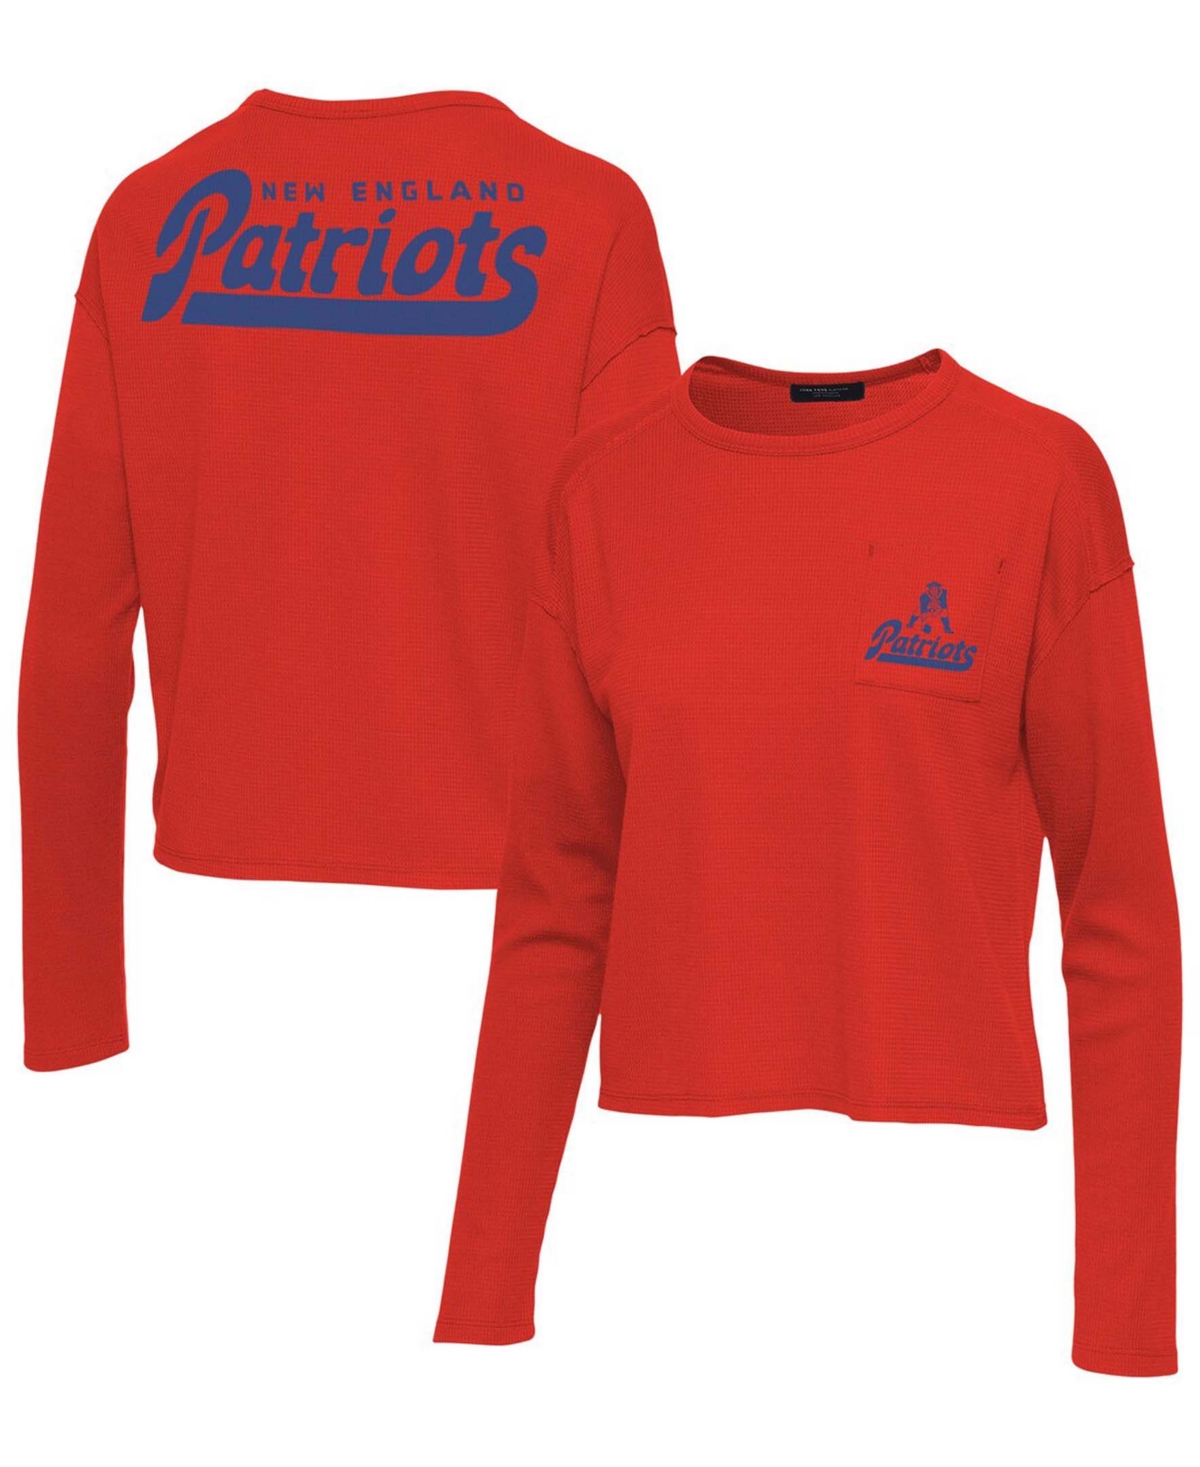 Women's Red New England Patriots Pocket Thermal Long Sleeve T-shirt - Red